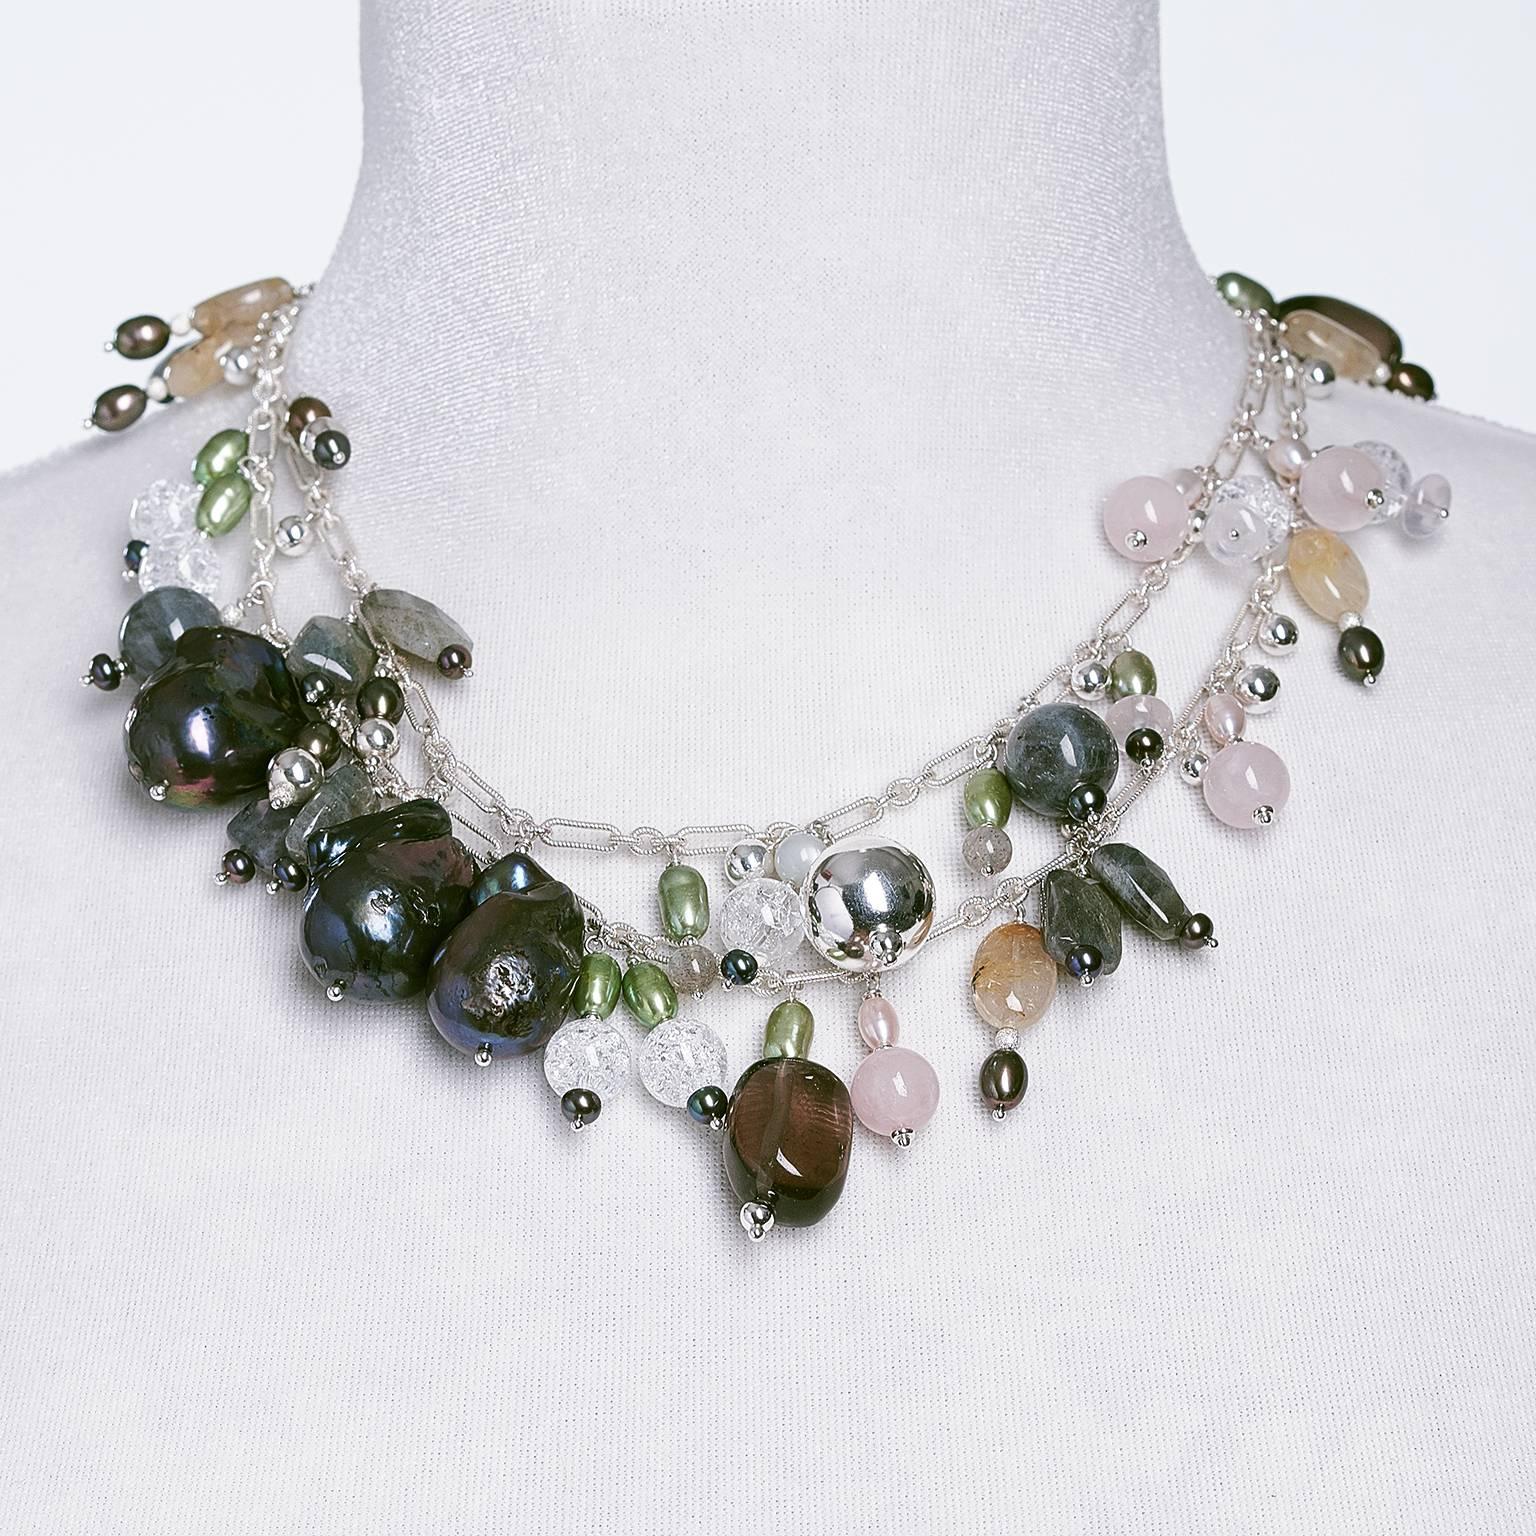 This long silver chain opera drop necklace composed of 45 individually handmade charm beads made of natural gemstones and multicolored pearls emphasized with three large black cultured freshwater baroque pearls measuring  26.20 x 20.50 mm, 28.50 x